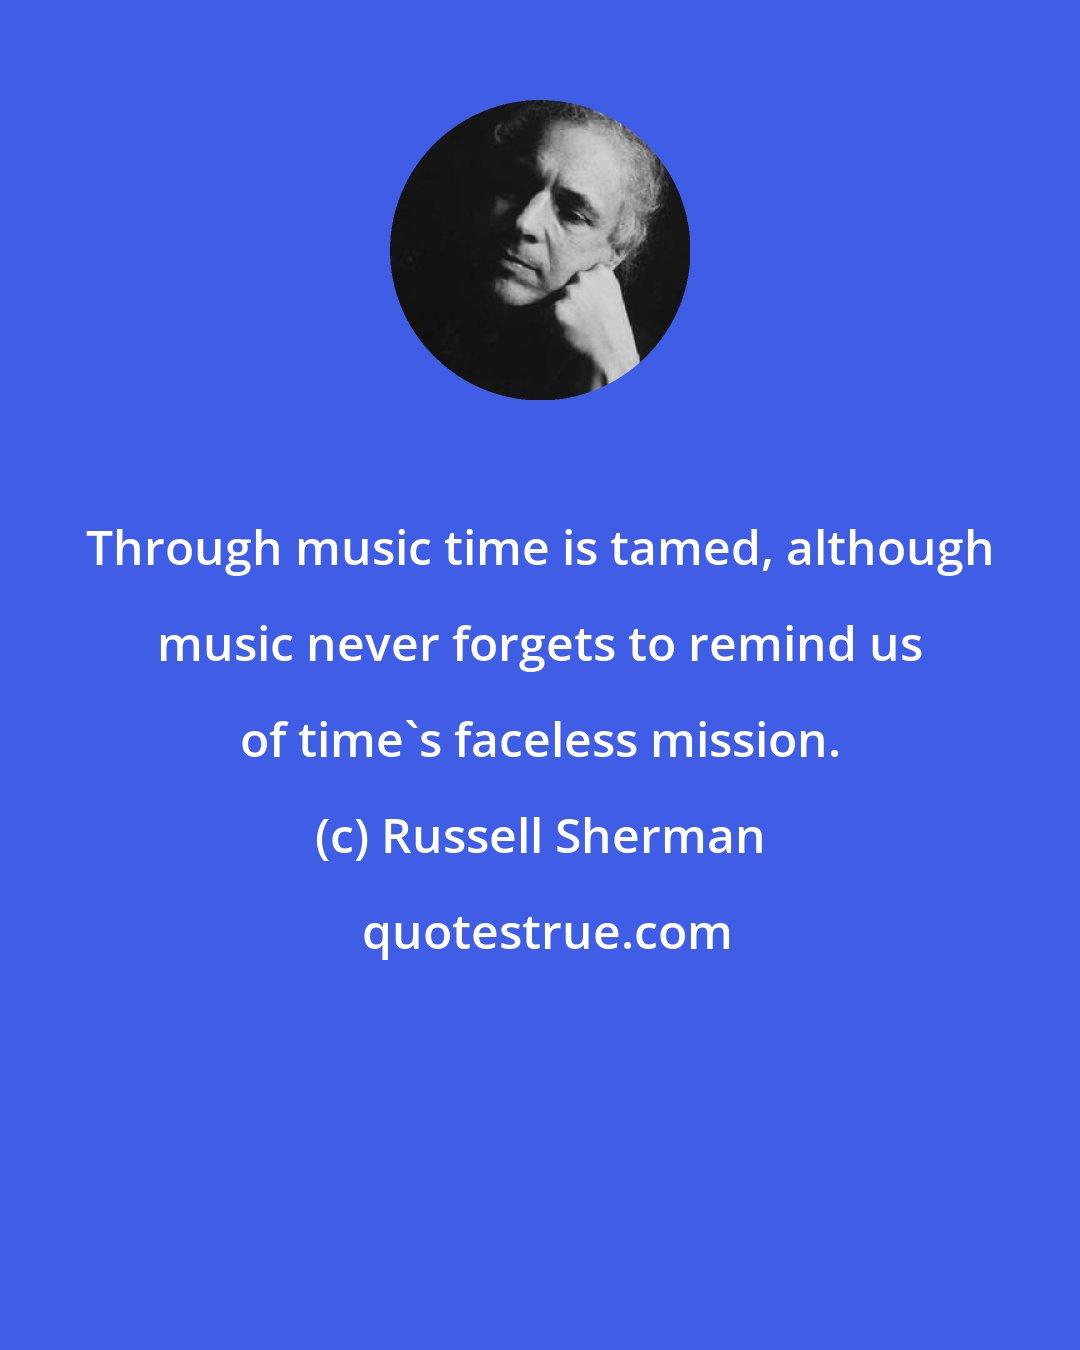 Russell Sherman: Through music time is tamed, although music never forgets to remind us of time's faceless mission.